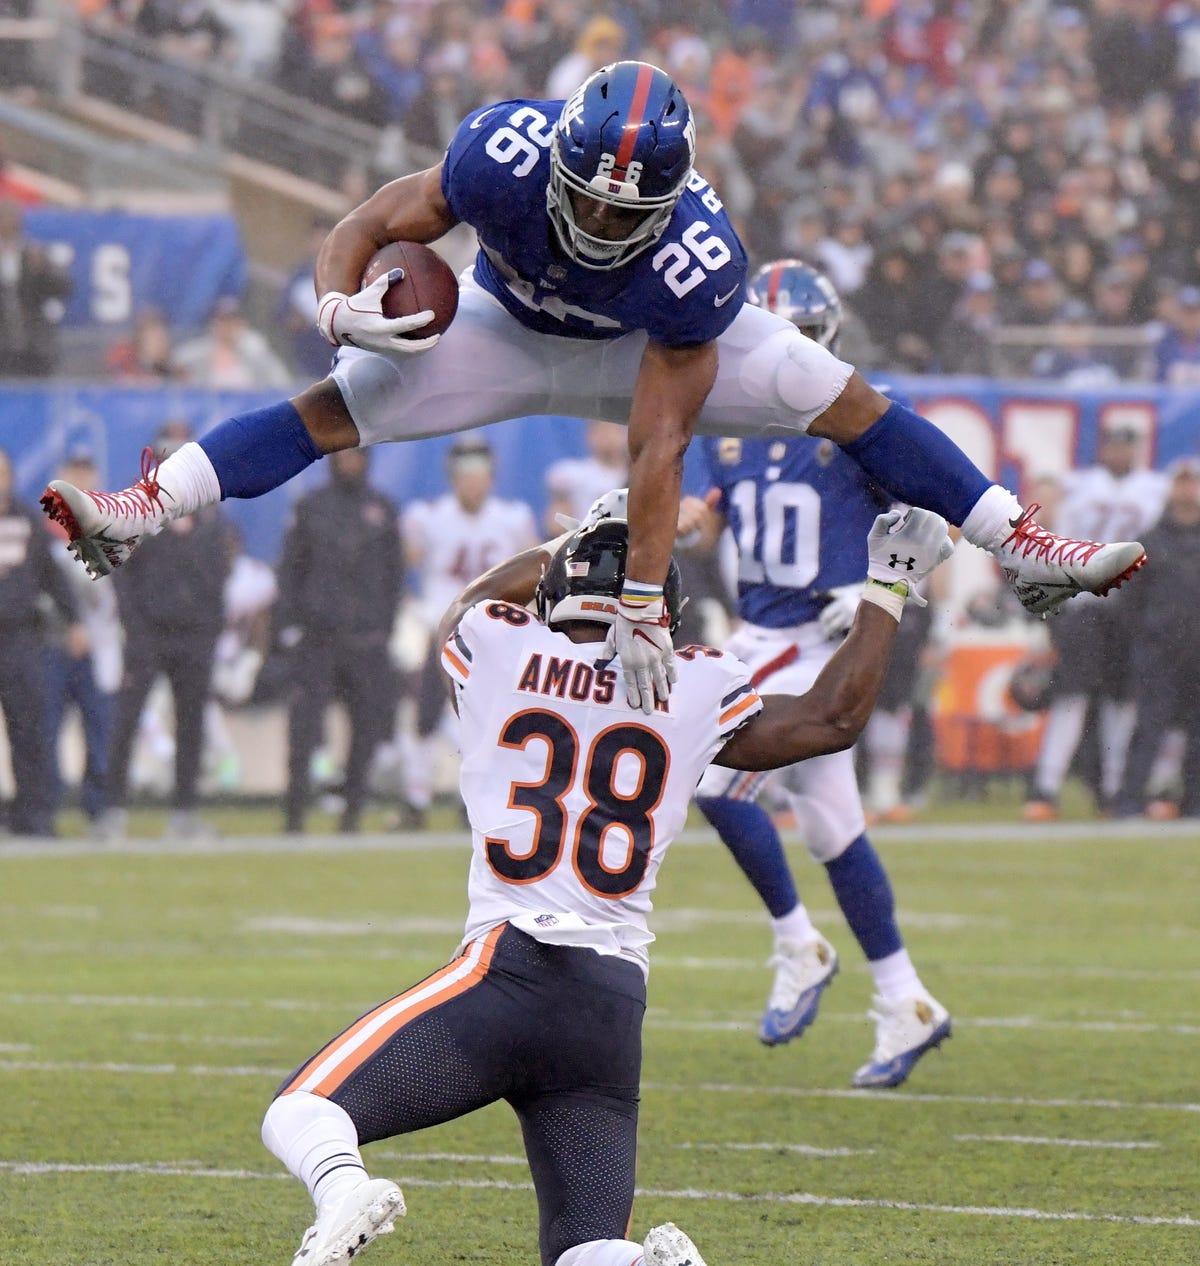 Saquon Barkley leaping to historic heights with NY Giants